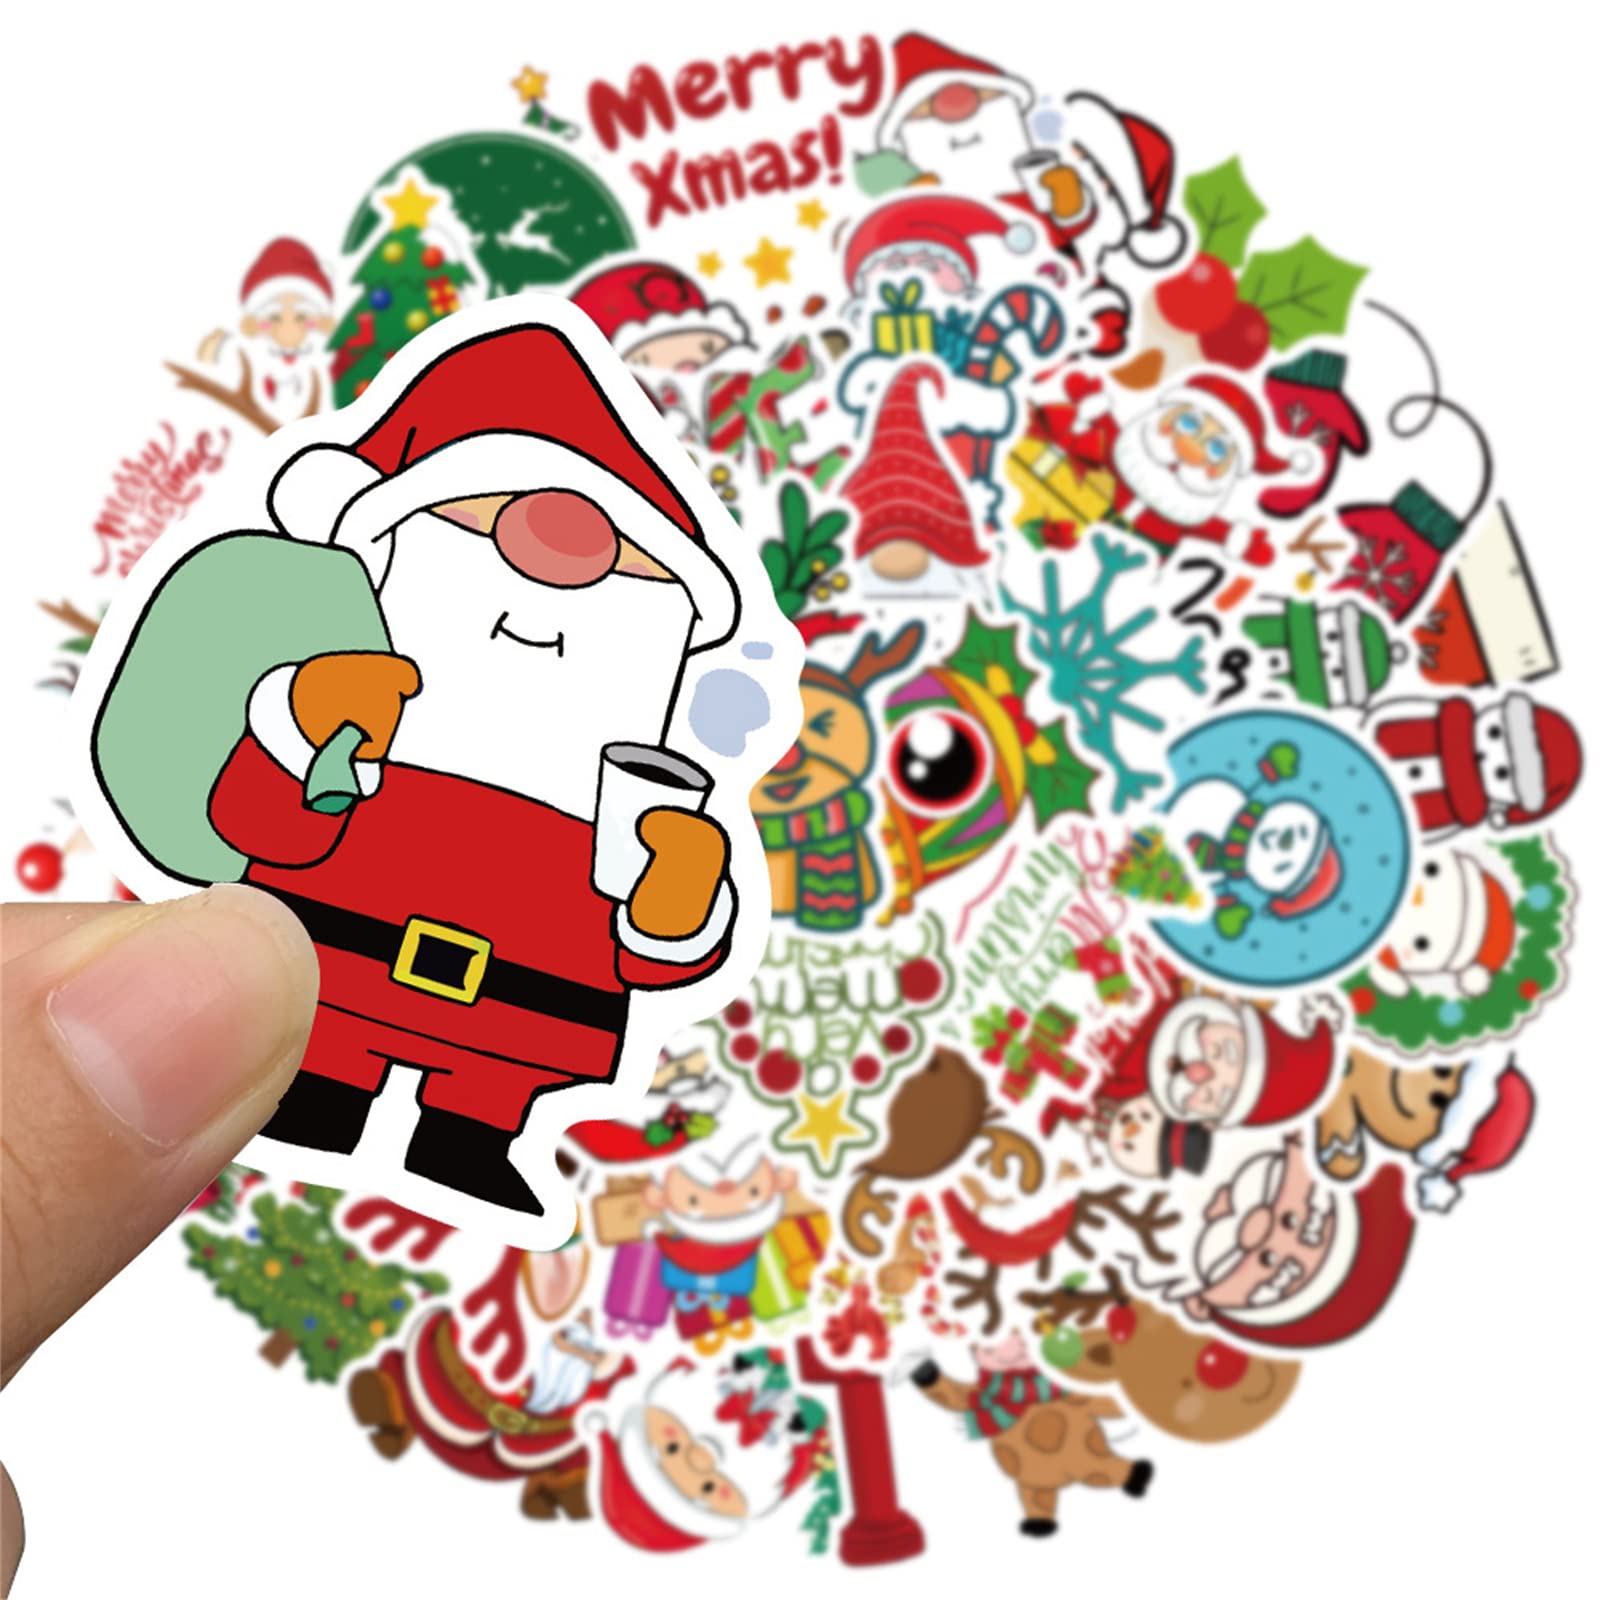 50PCS Christmas Stickers for Laptop Water Bottles Cards Scrapbooking Holiday Party Favors Holiday,Stickers Christmas Stickers Gifts for Kids (50PCS A)